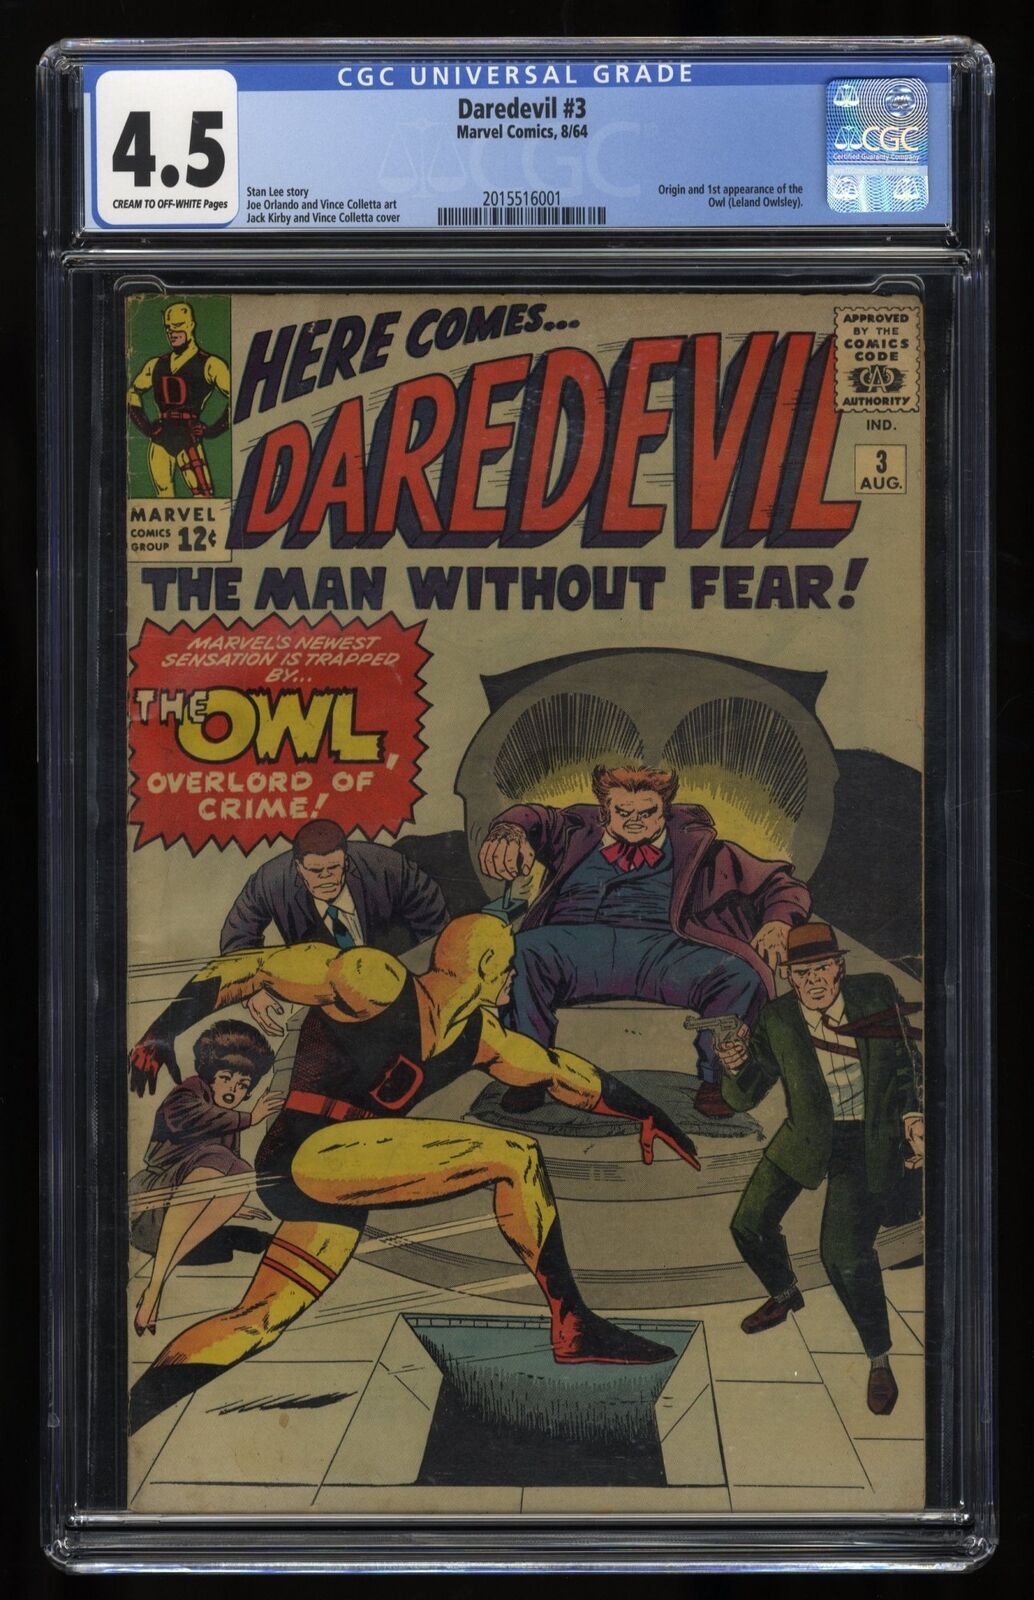 Daredevil (1964) #3 CGC VG+ 4.5 1st Appearance and Origin of the Owl Marvel